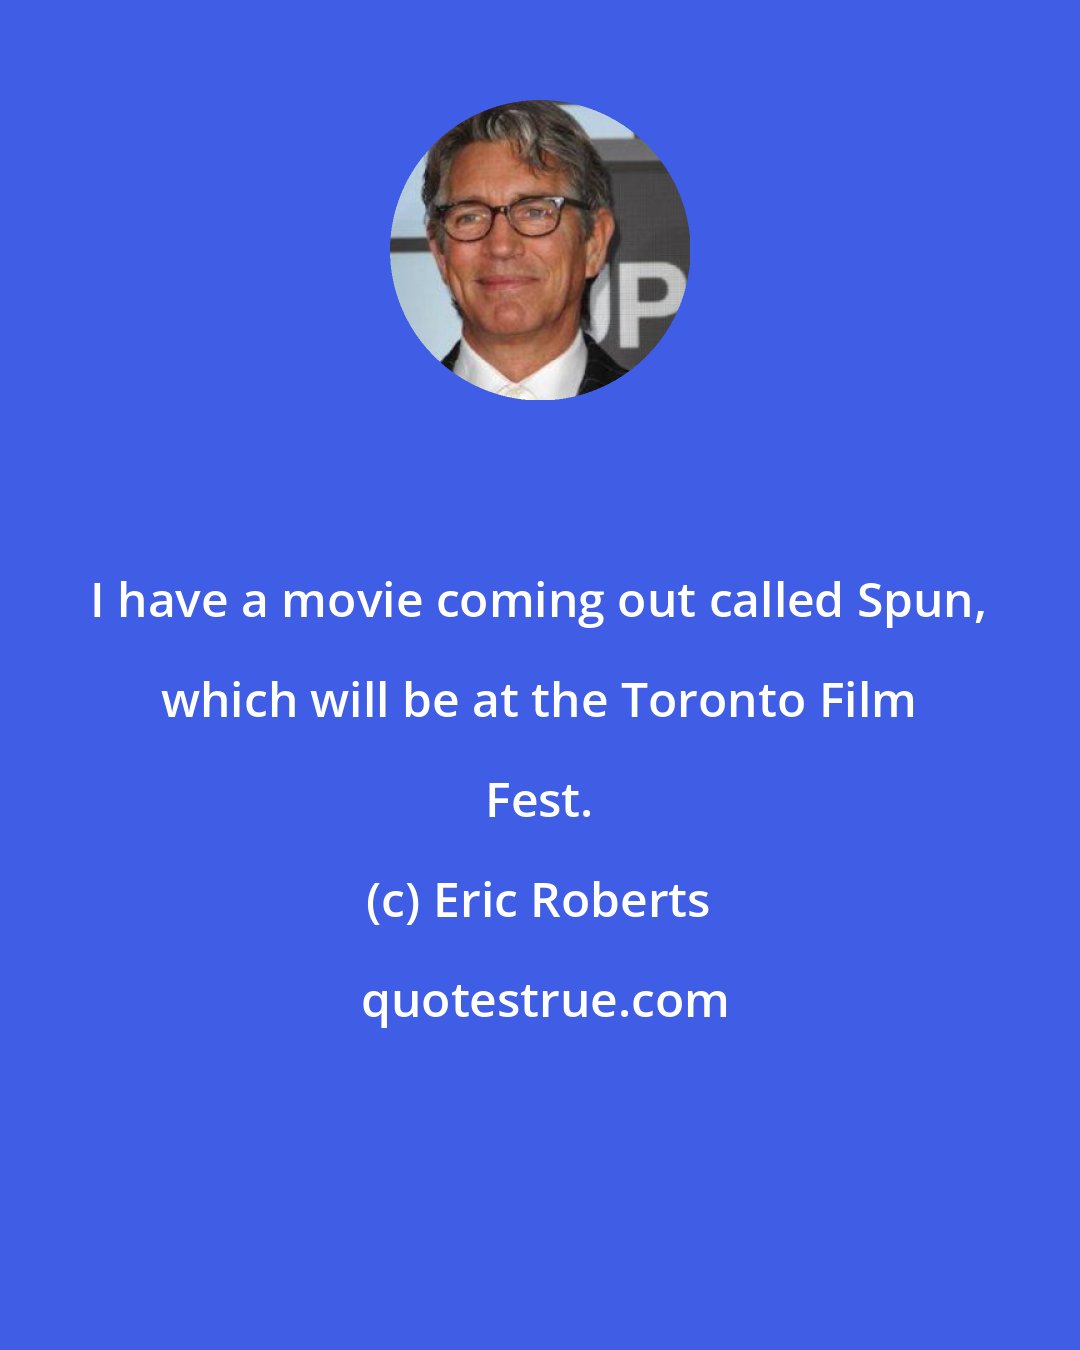 Eric Roberts: I have a movie coming out called Spun, which will be at the Toronto Film Fest.